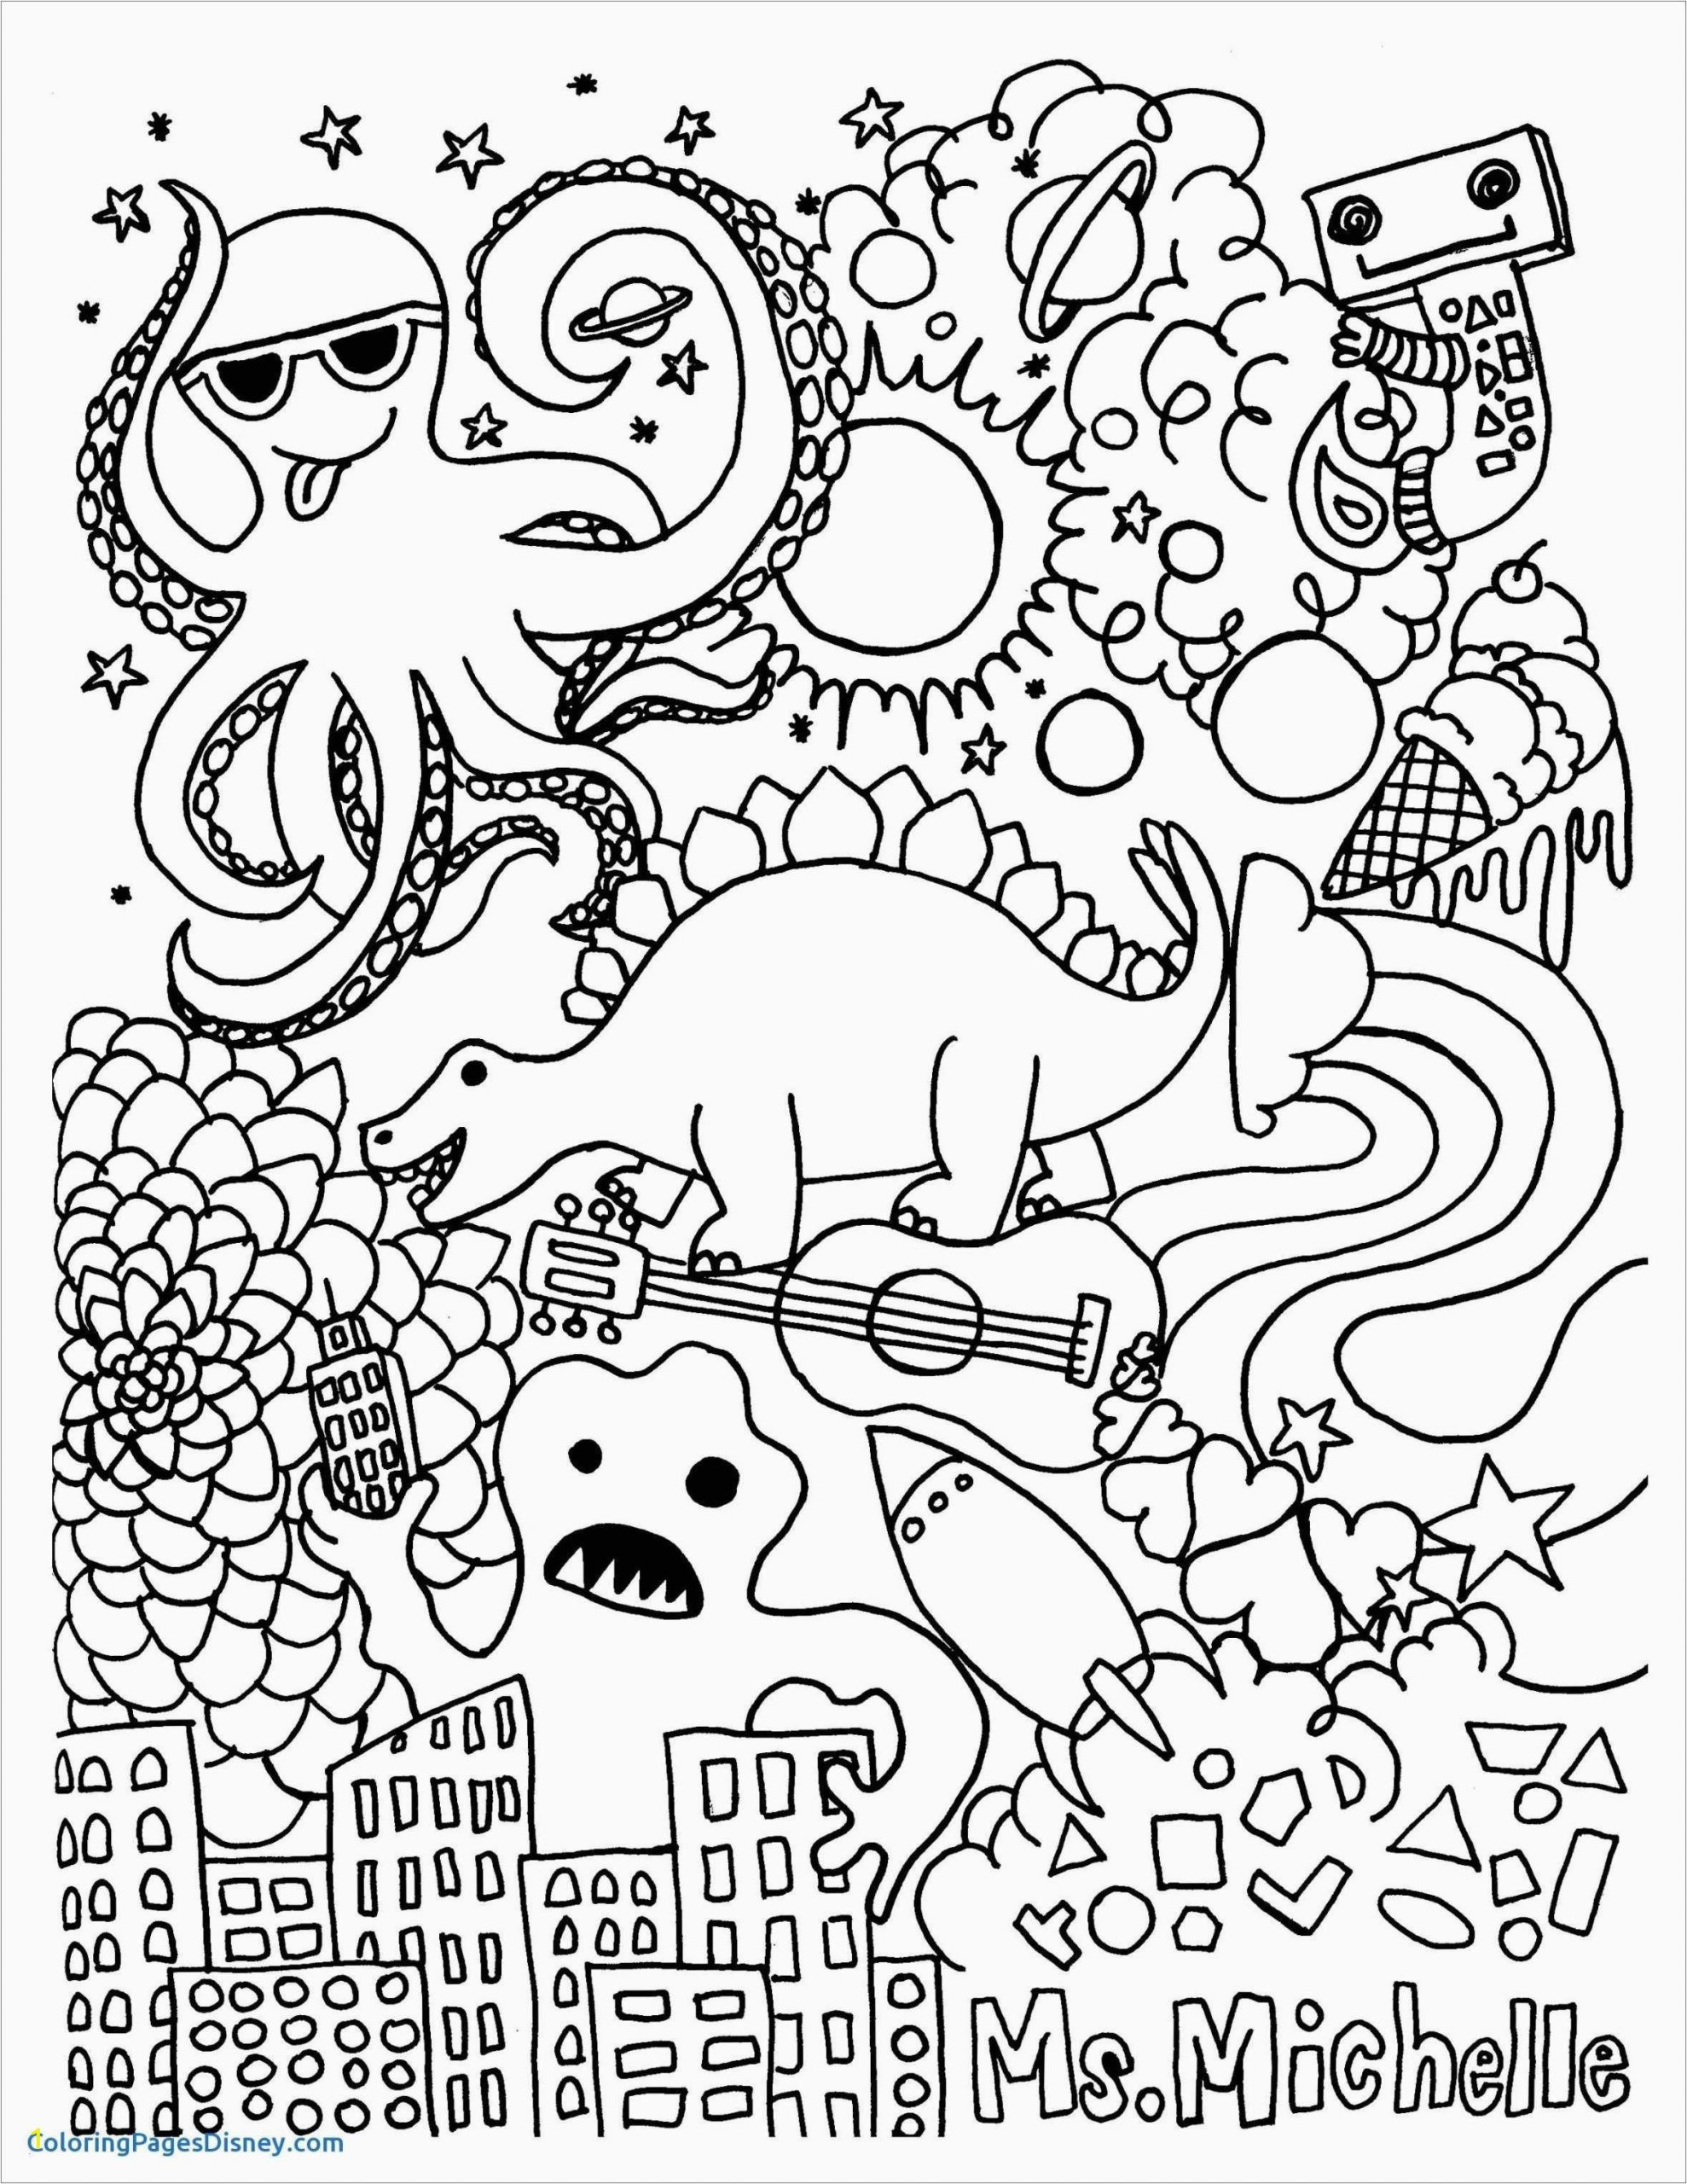 Disney Coloring Pages for Adults 30 Elegant Despicable Me Coloring Pages In 2020 with Images